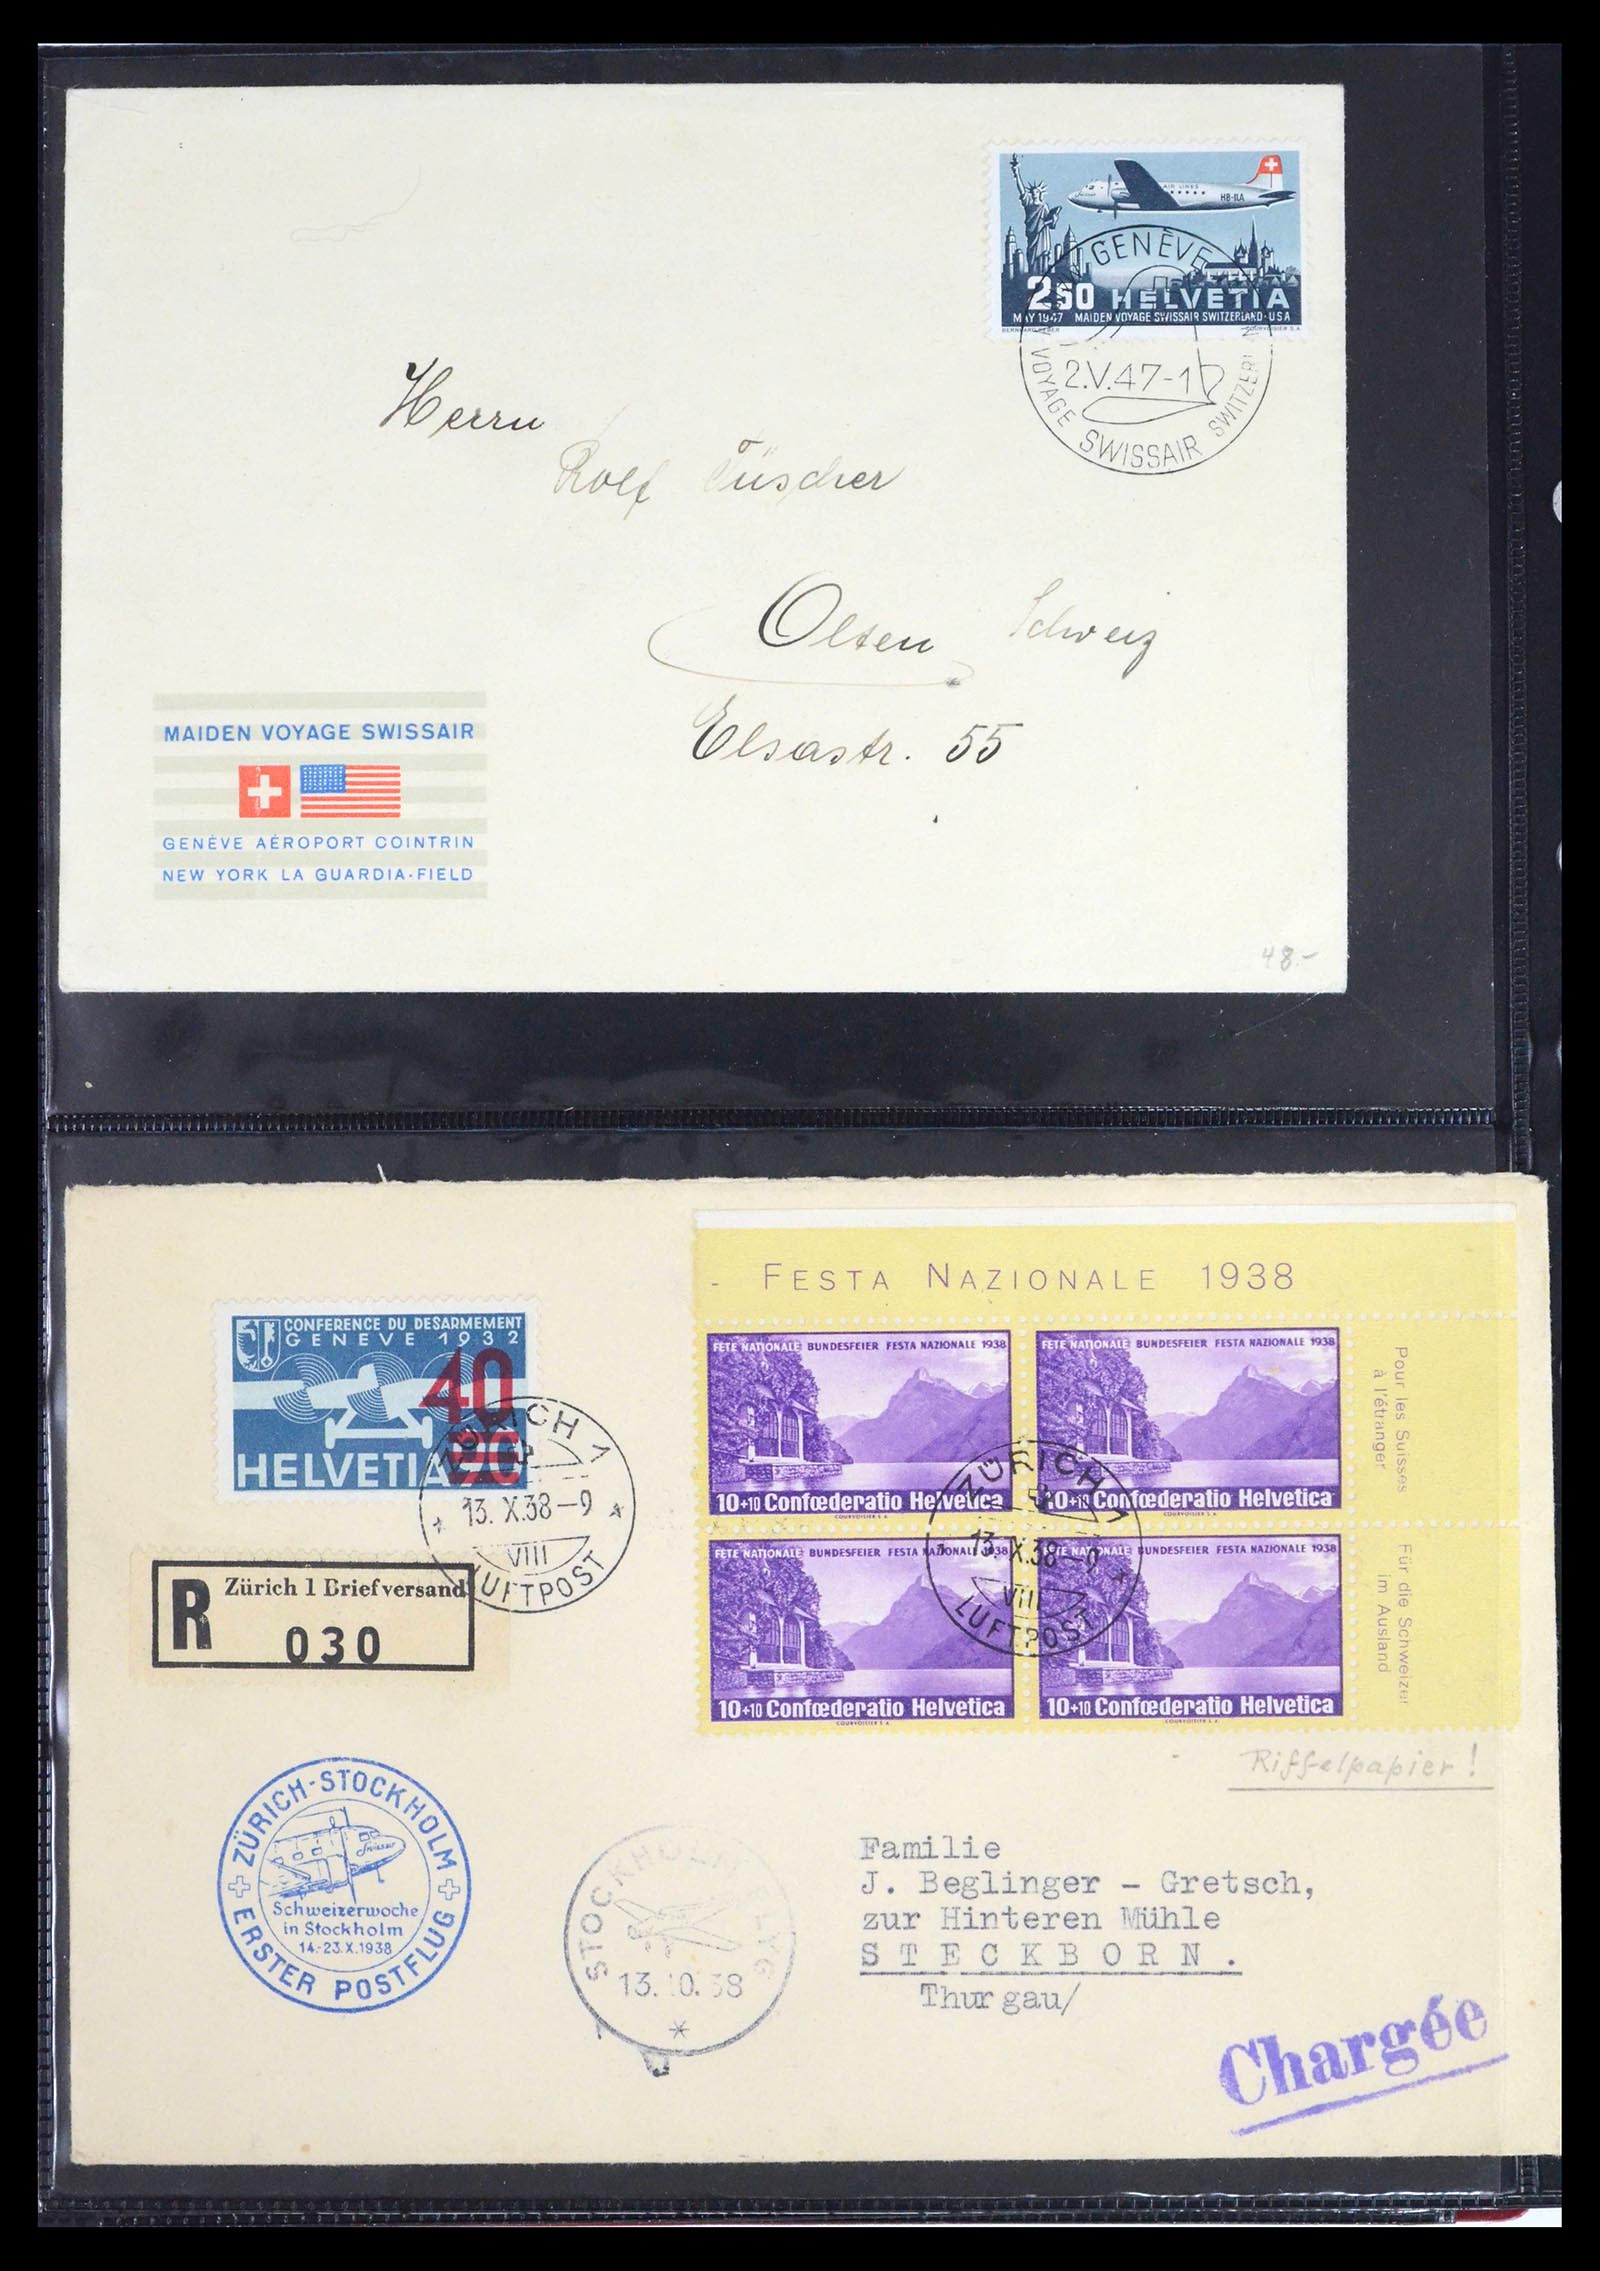 39533 0018 - Stamp collection 39533 Zwitserland airmail covers 1925-1960.